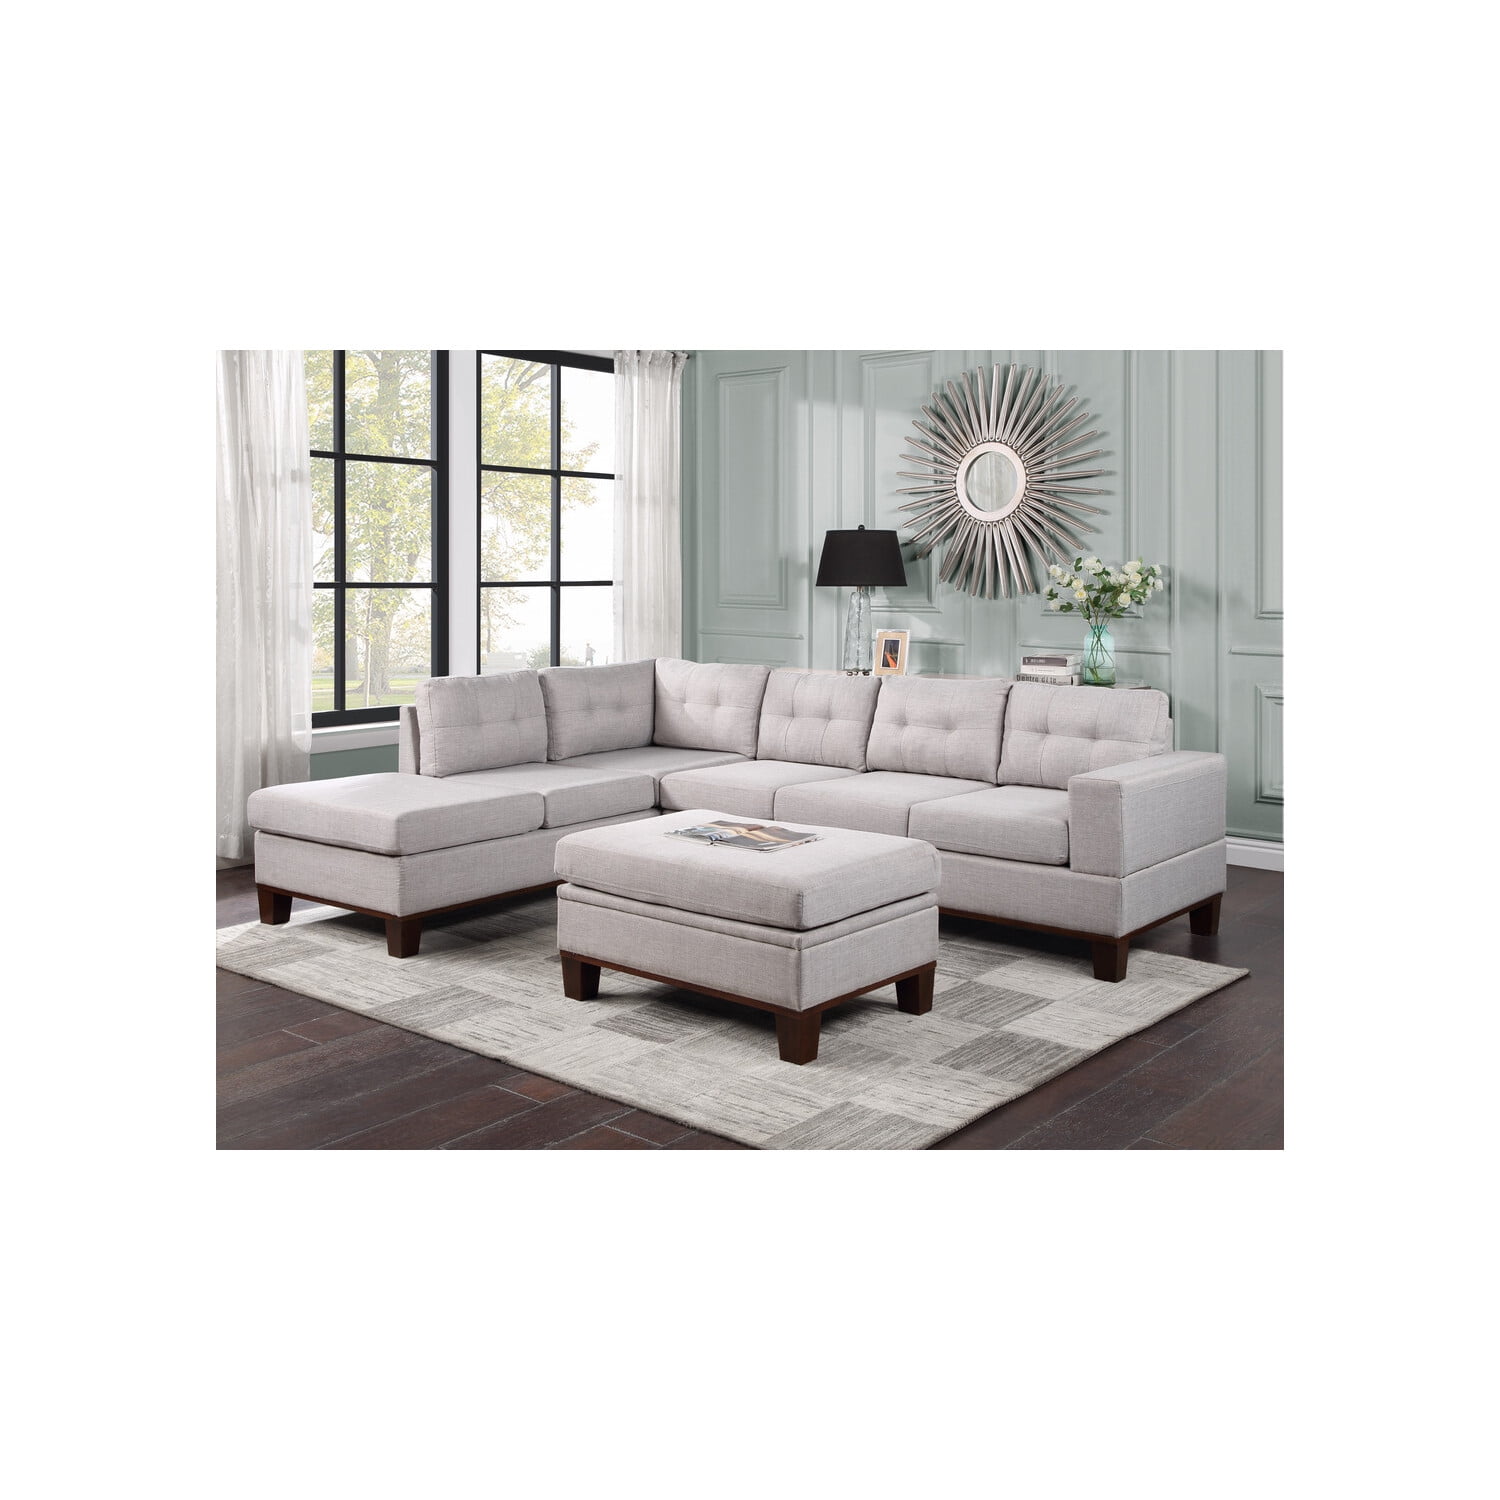 Lilola Home Hilo Fabric Reversible Sectional Sofa with Dropdown Armrest,  Cupholder, and Storage Ottoman 